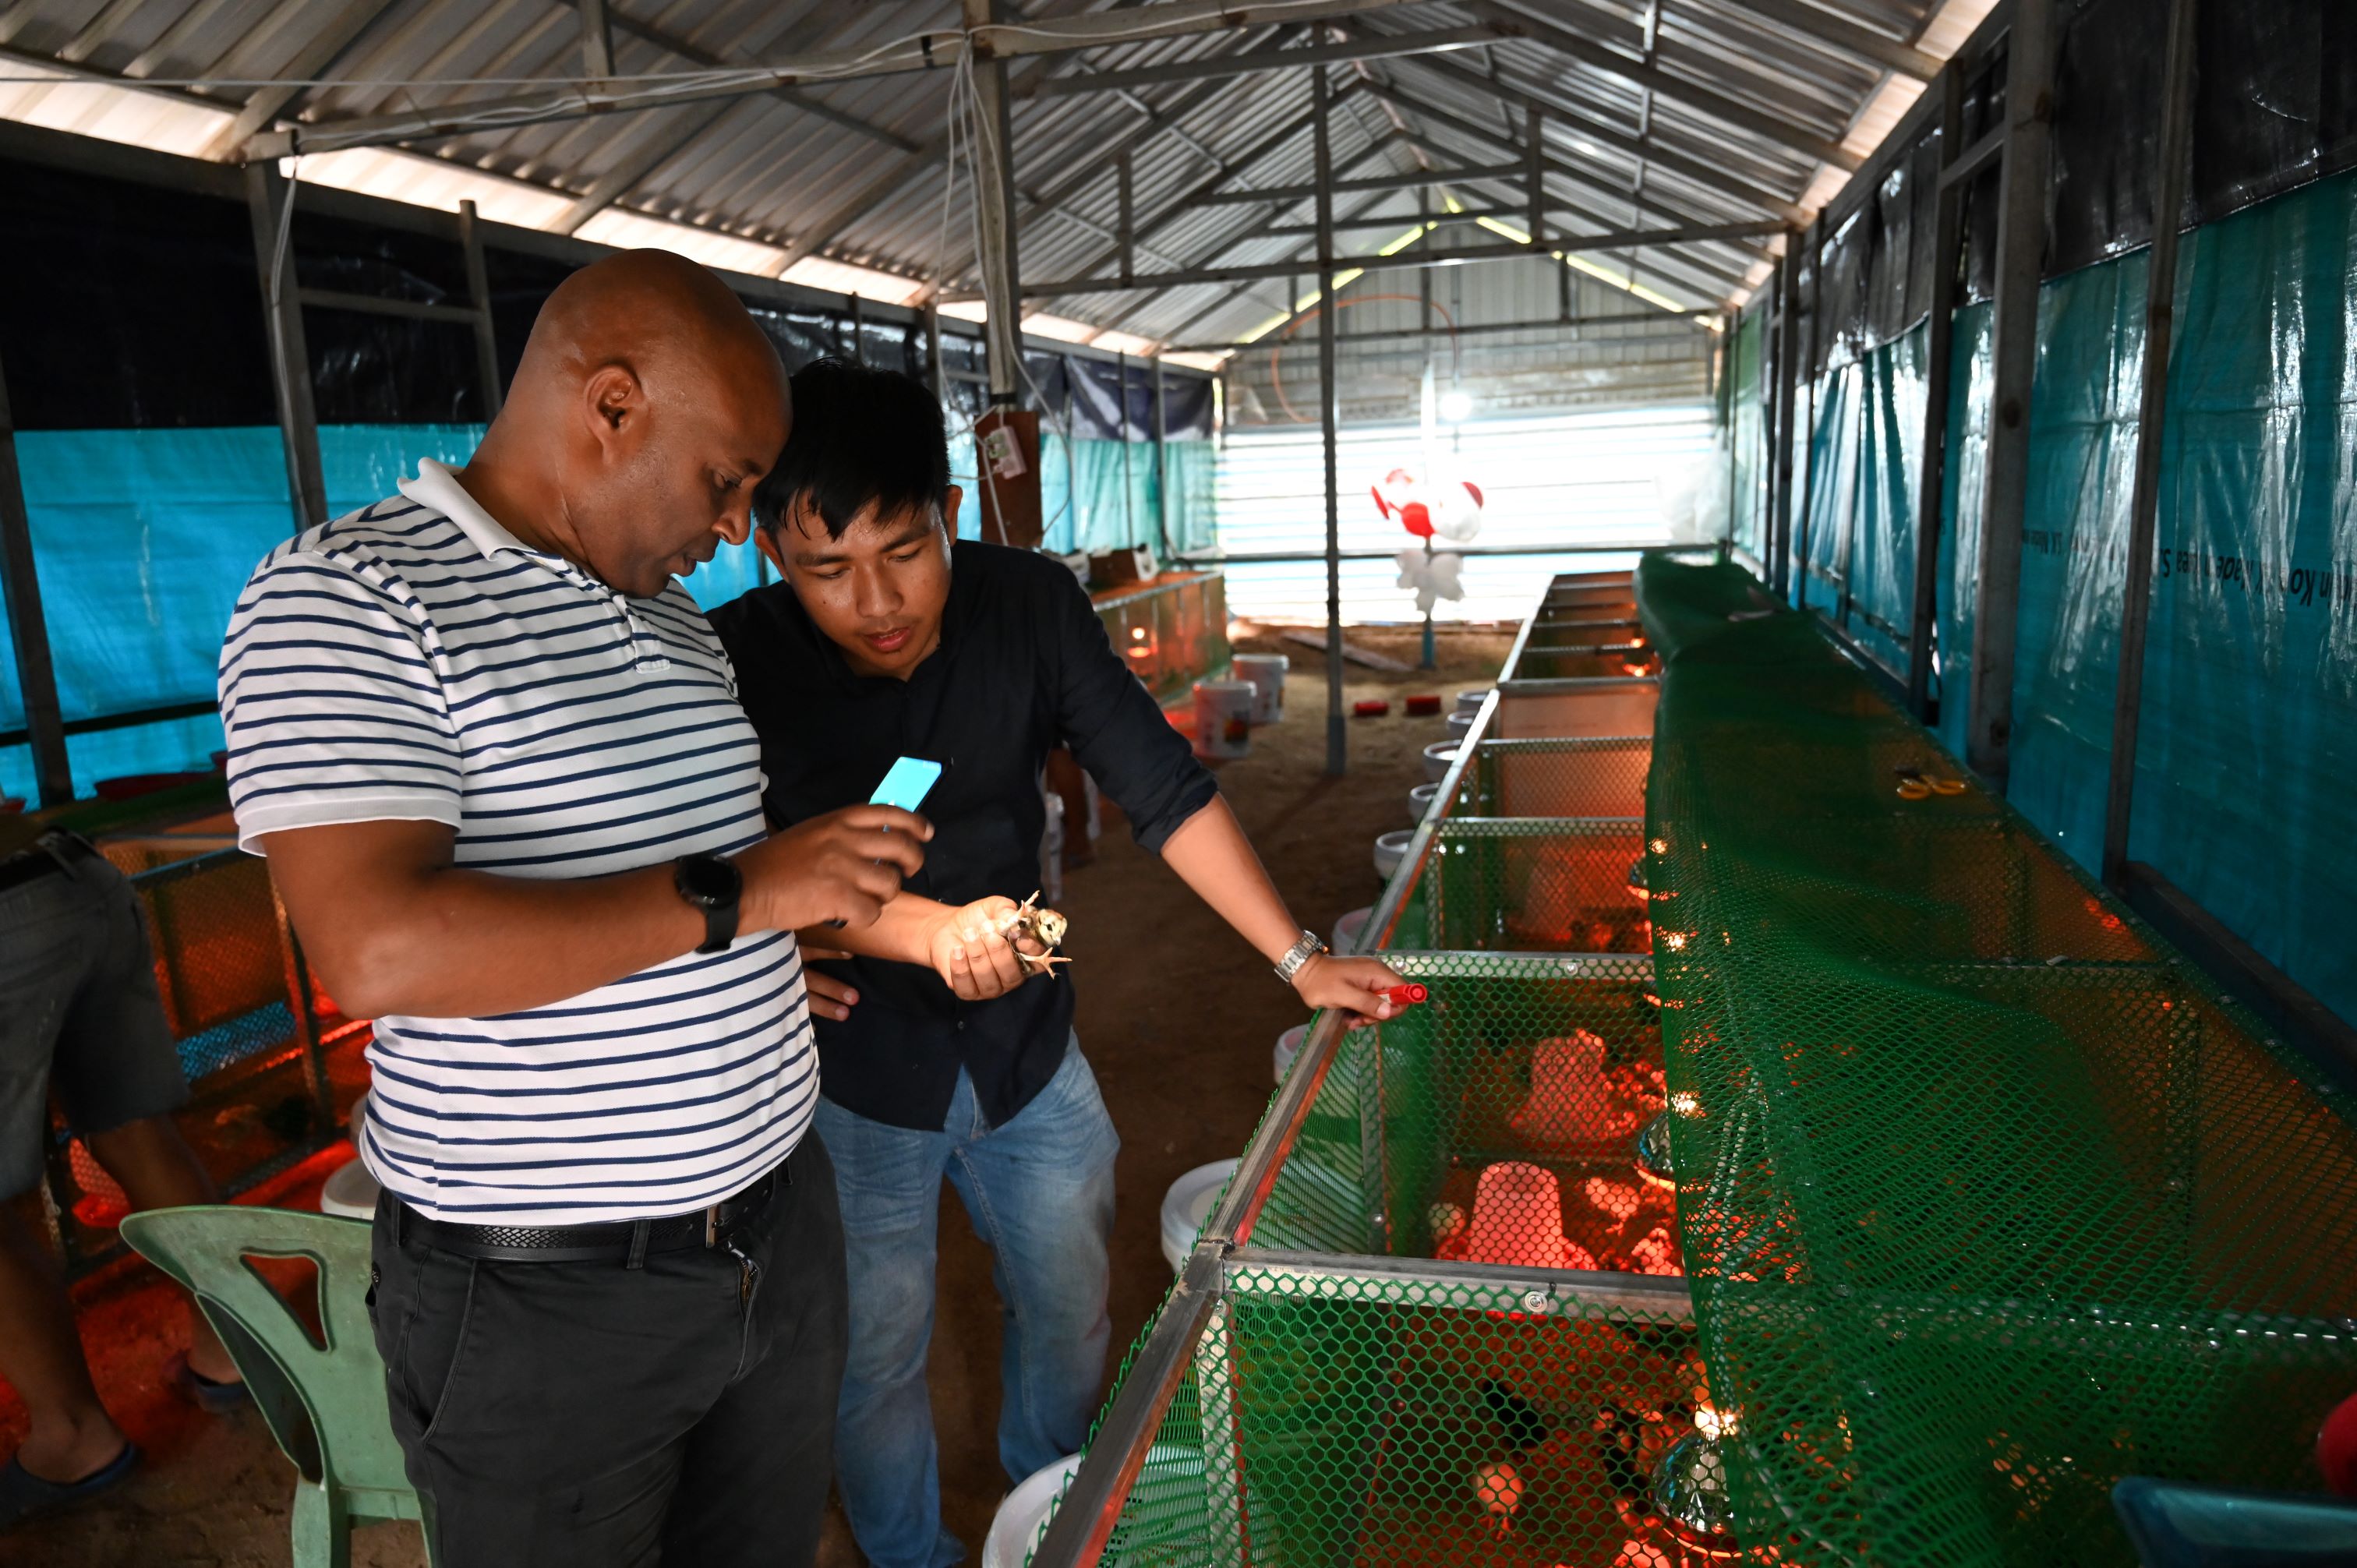 Two men looking at mobile device near chickens in hatchery.